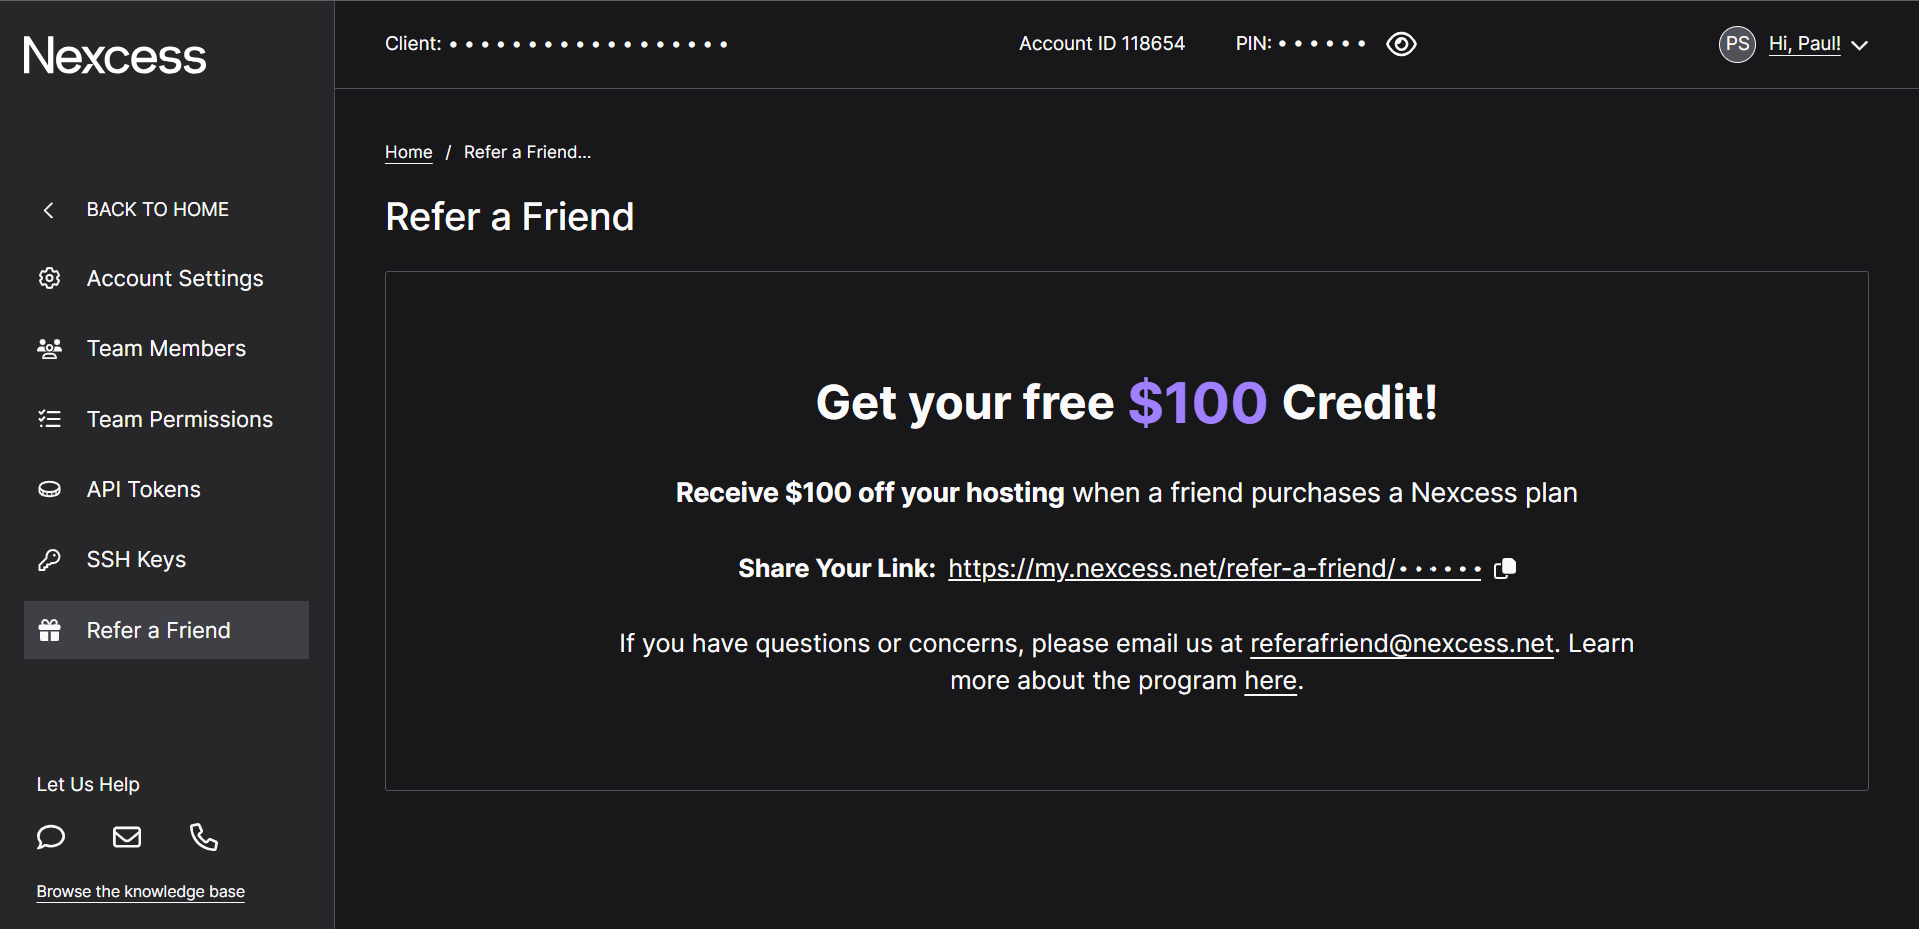 After you click, you will see a box that says, “Get your free $100 credit.” Included with this information is a URL that connects to your customer ID. This is your referral link. You can click the Copy icon (two squares) on the right side to copy the link. Get excited to refer a friend and get $100!